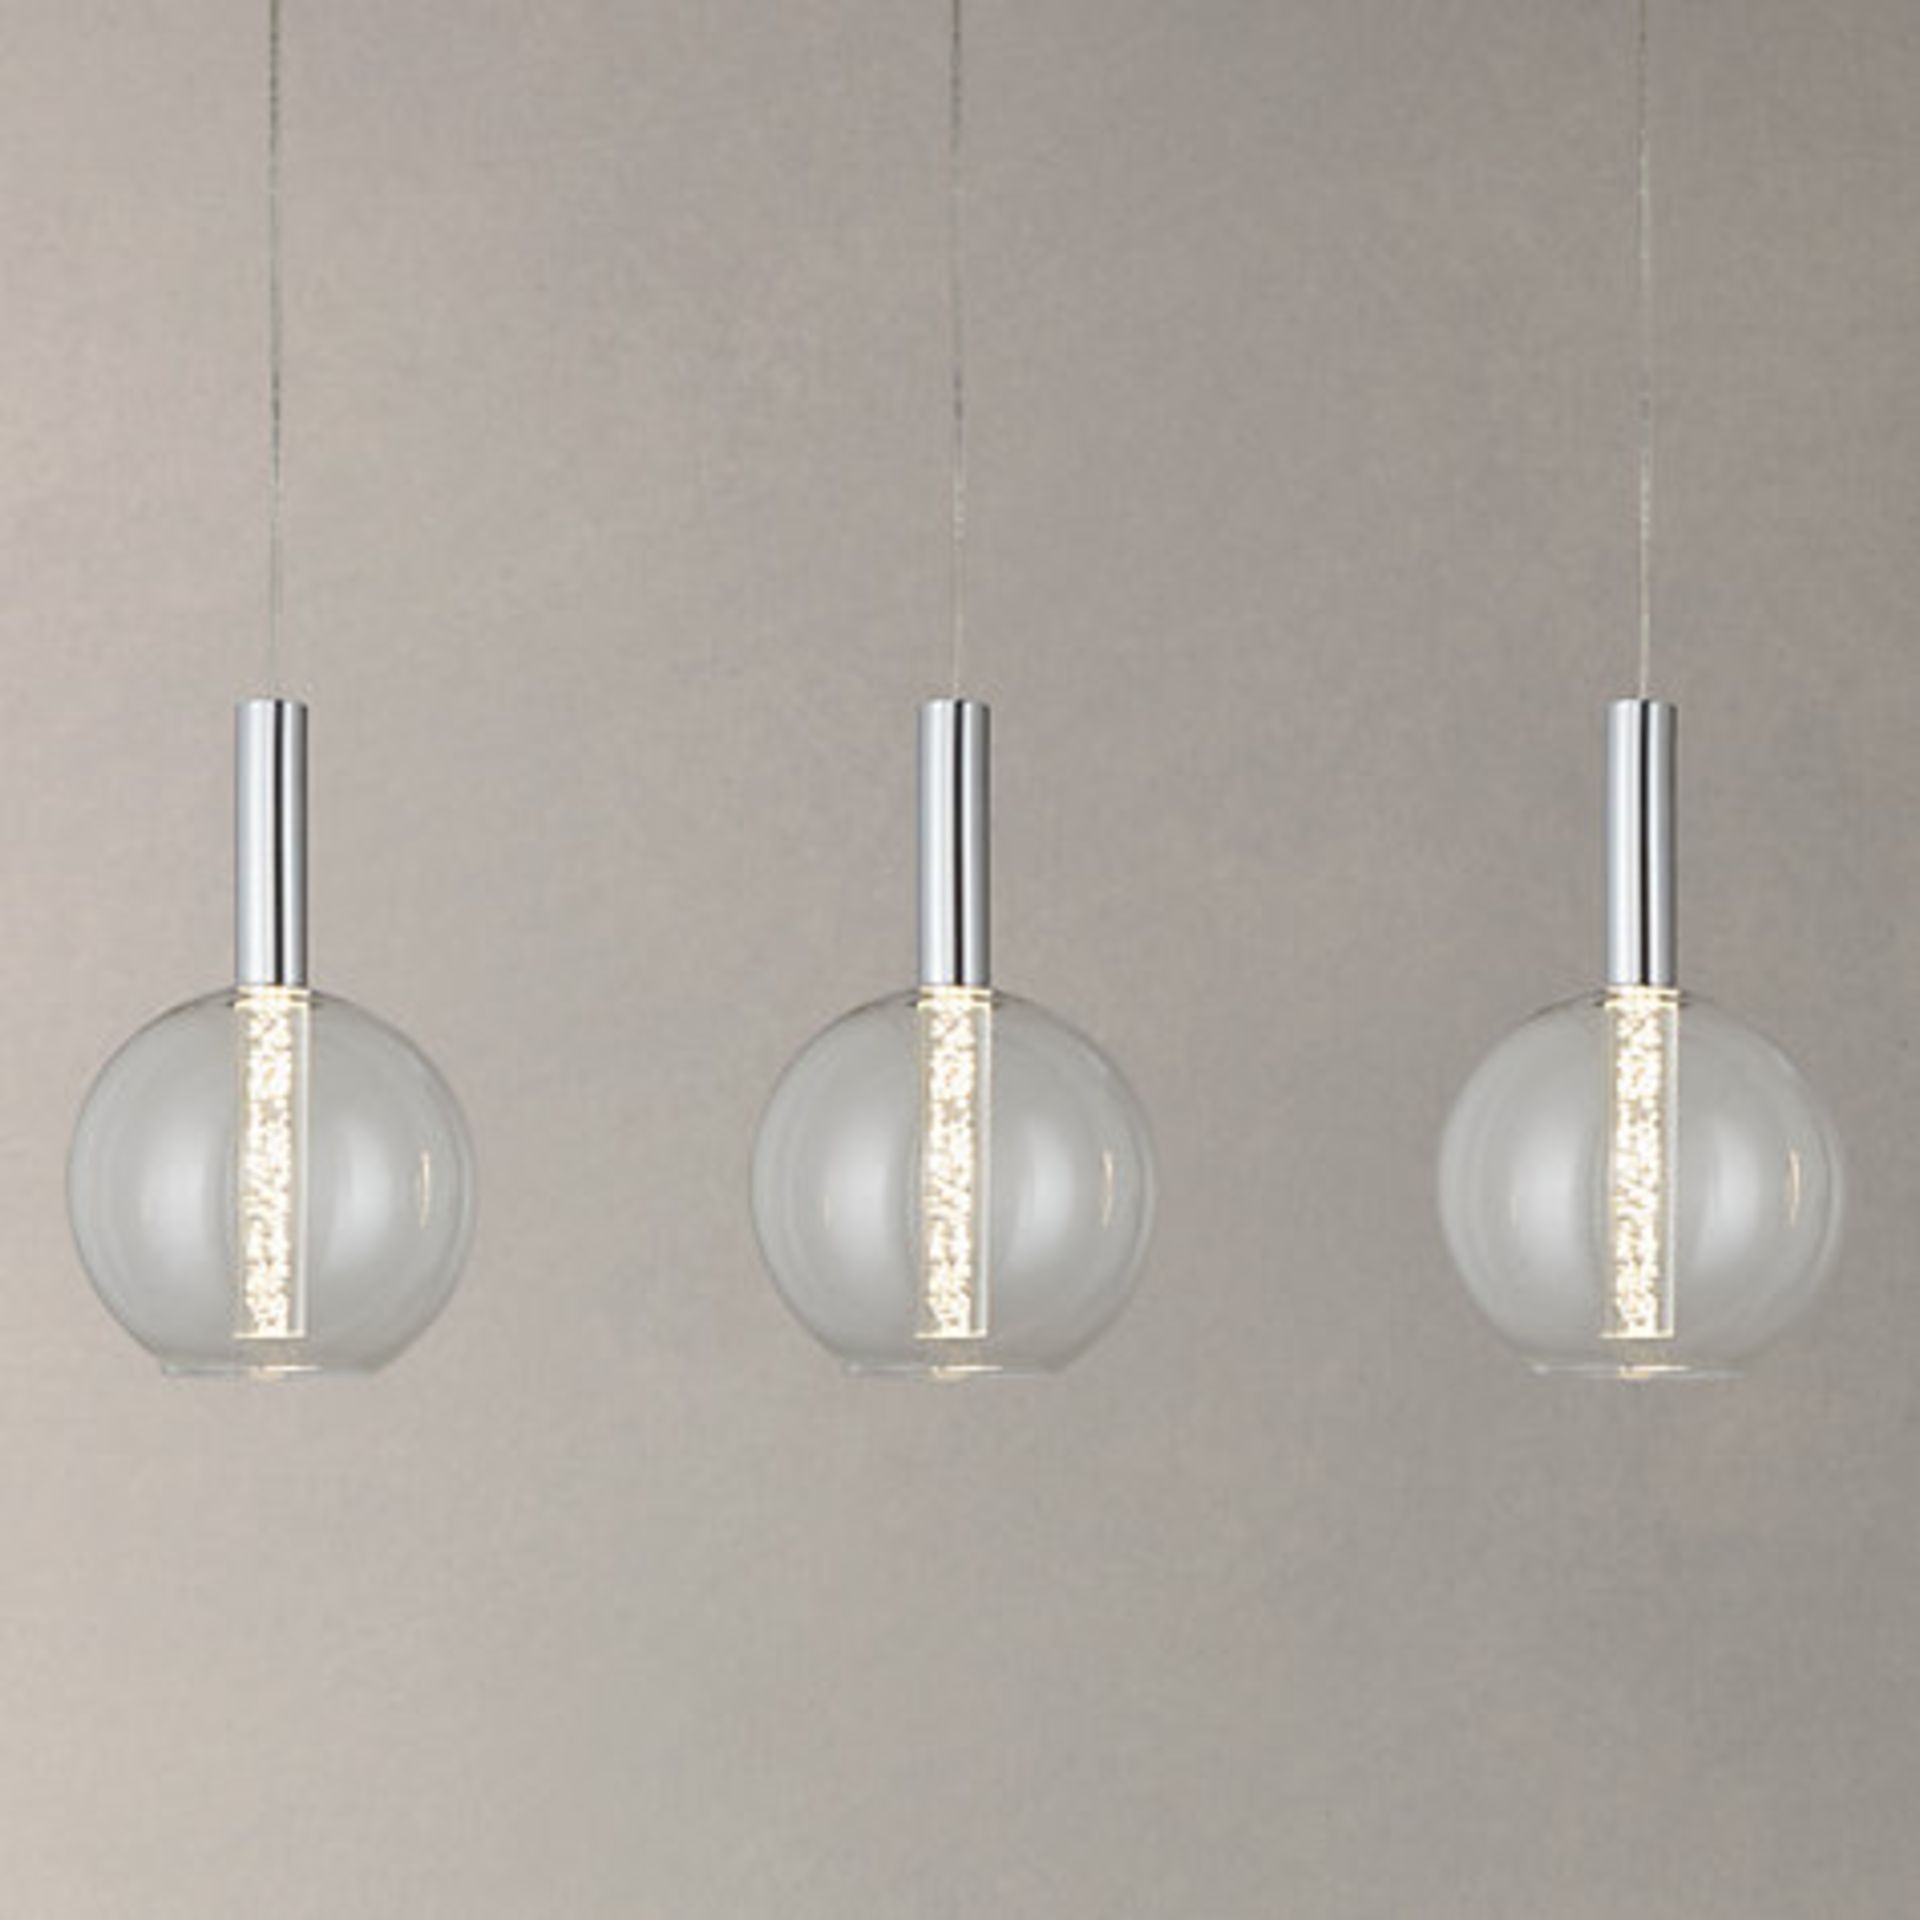 1 x BOXED LED BUBBLE 3 BAR CEILING LIGHT RRP £240 (16.10.17) (3731782) *PLEASE NOTE THAT THE BID